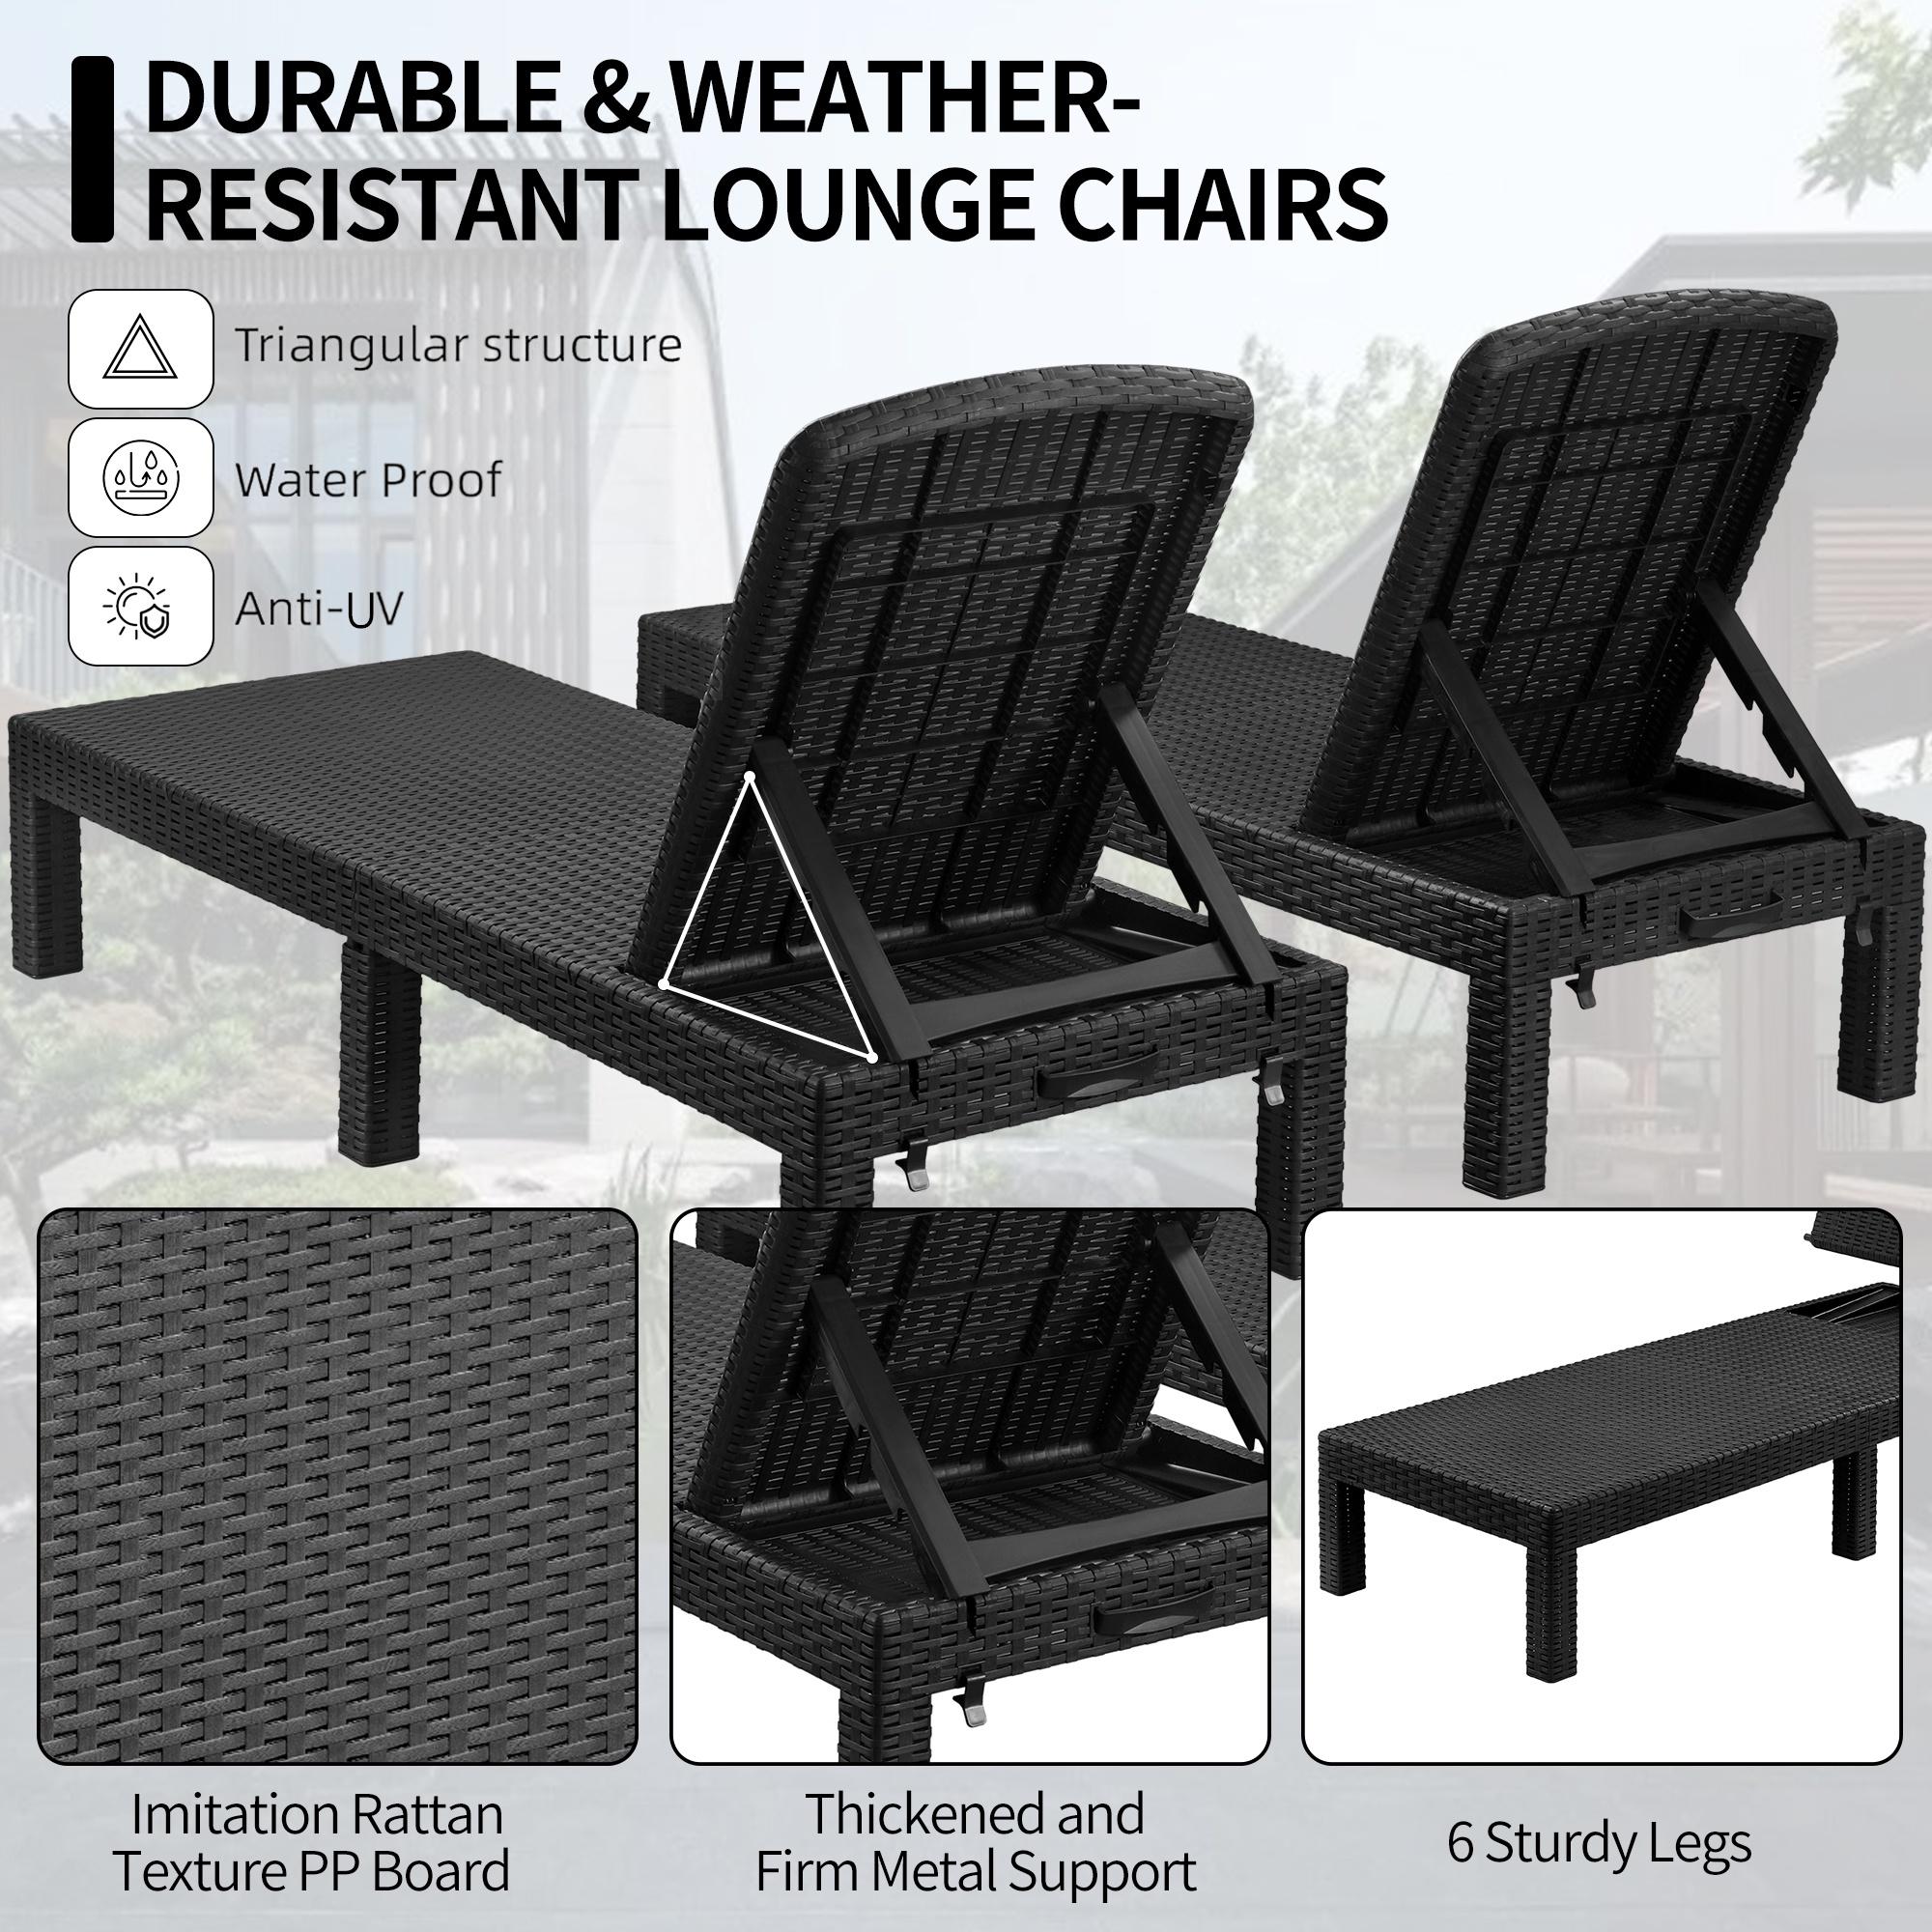 Patio Lounge Chairs Set of 2, Outdoor Chaise Lounge Chair with 4 Backrest Angles, Patio Foldable Reclining Chair Furniture for Poolside, Deck, Backyard, Black - image 3 of 9